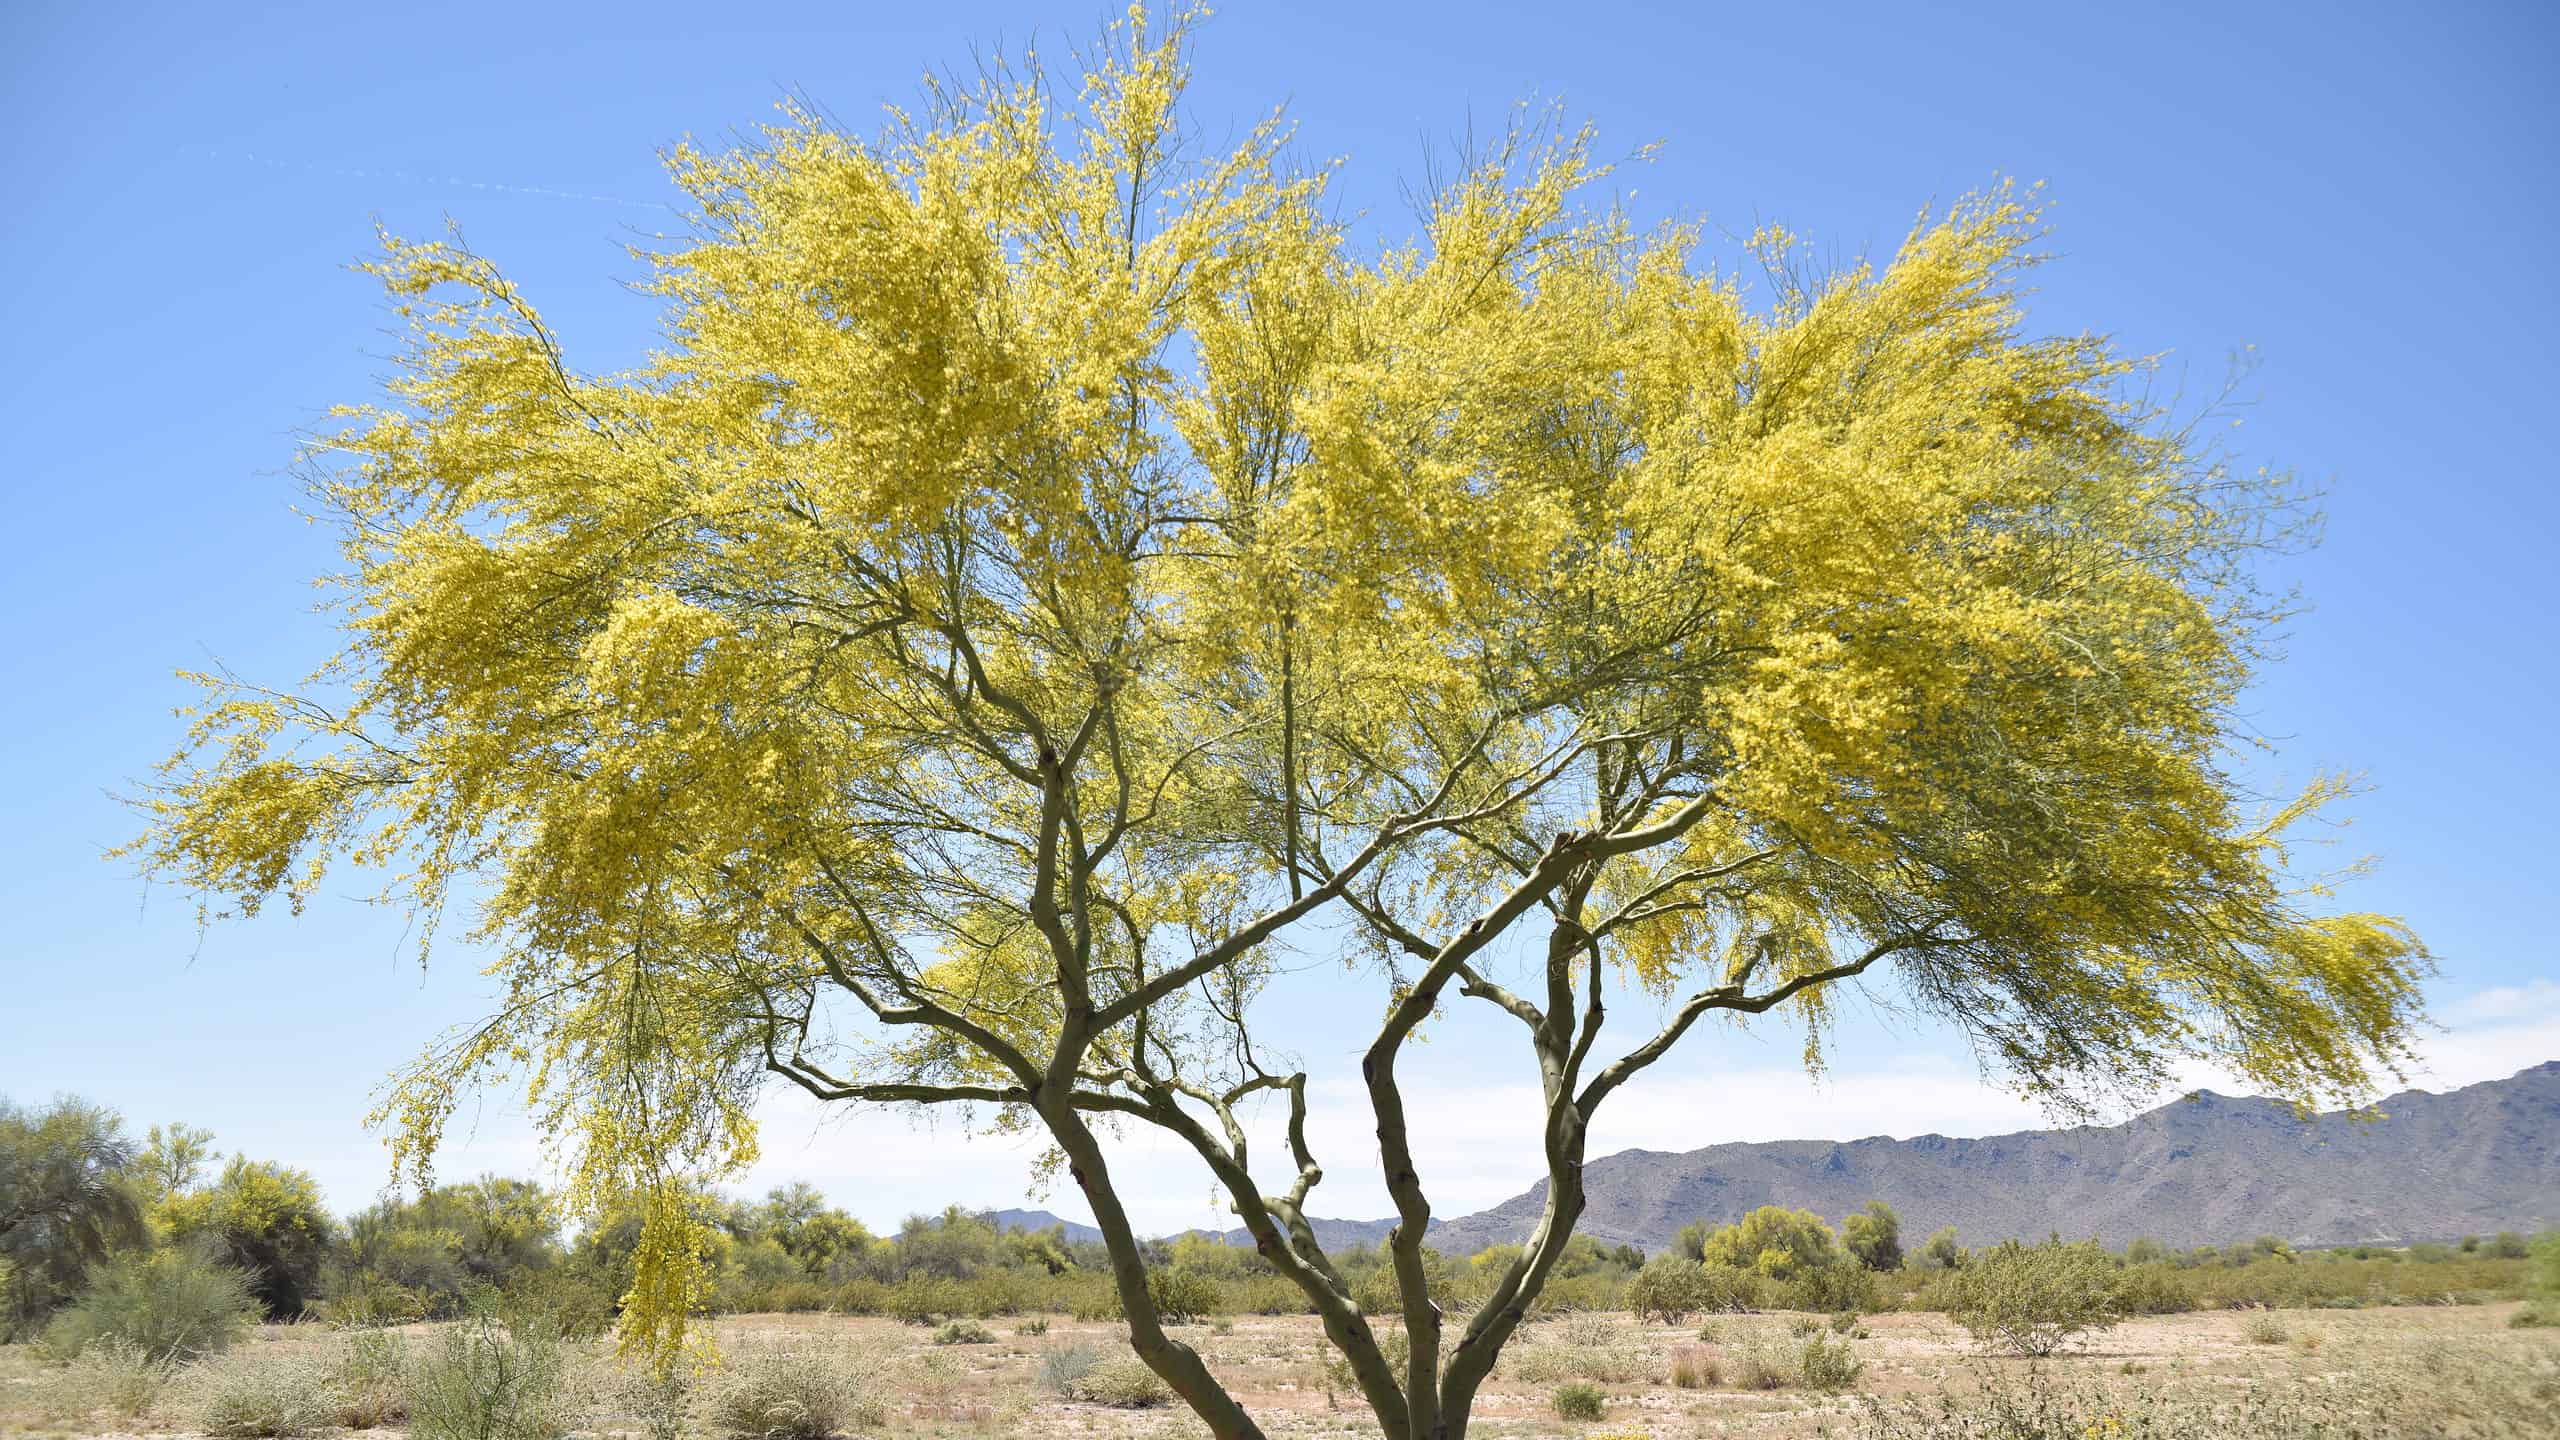 The palo verde is the state tree of Arizona.